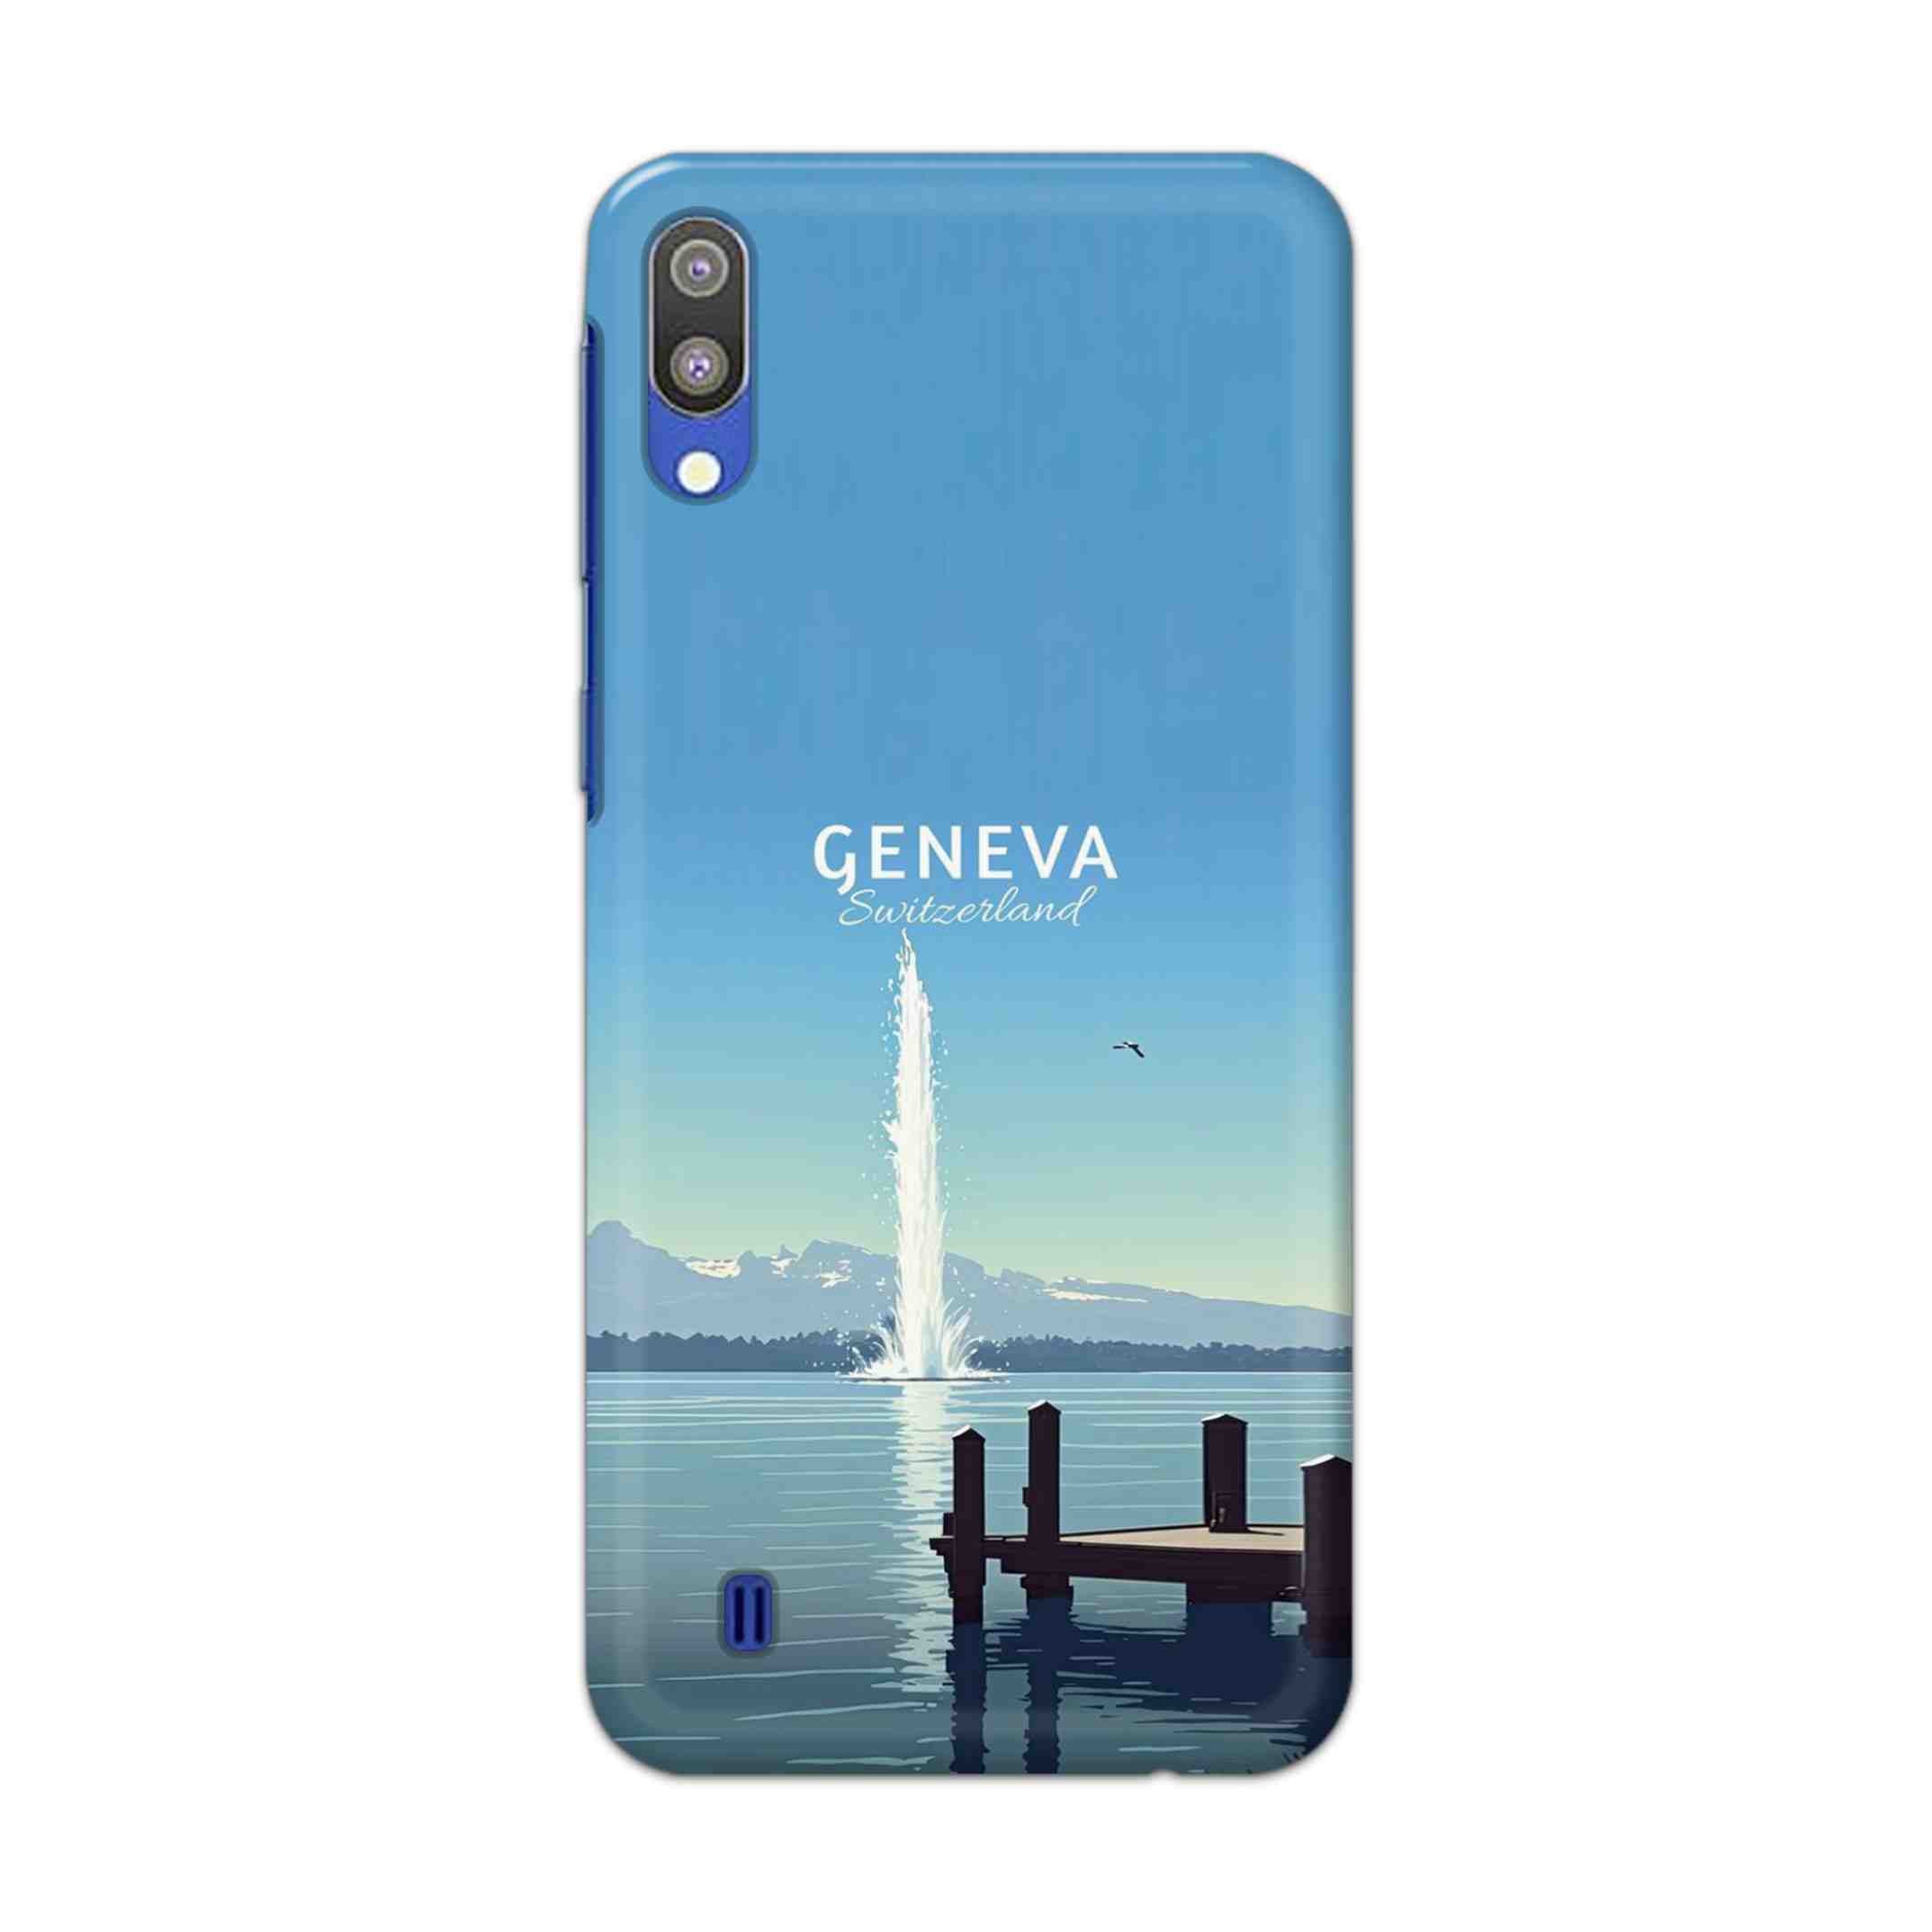 Buy Geneva Hard Back Mobile Phone Case Cover For Samsung Galaxy M10 Online